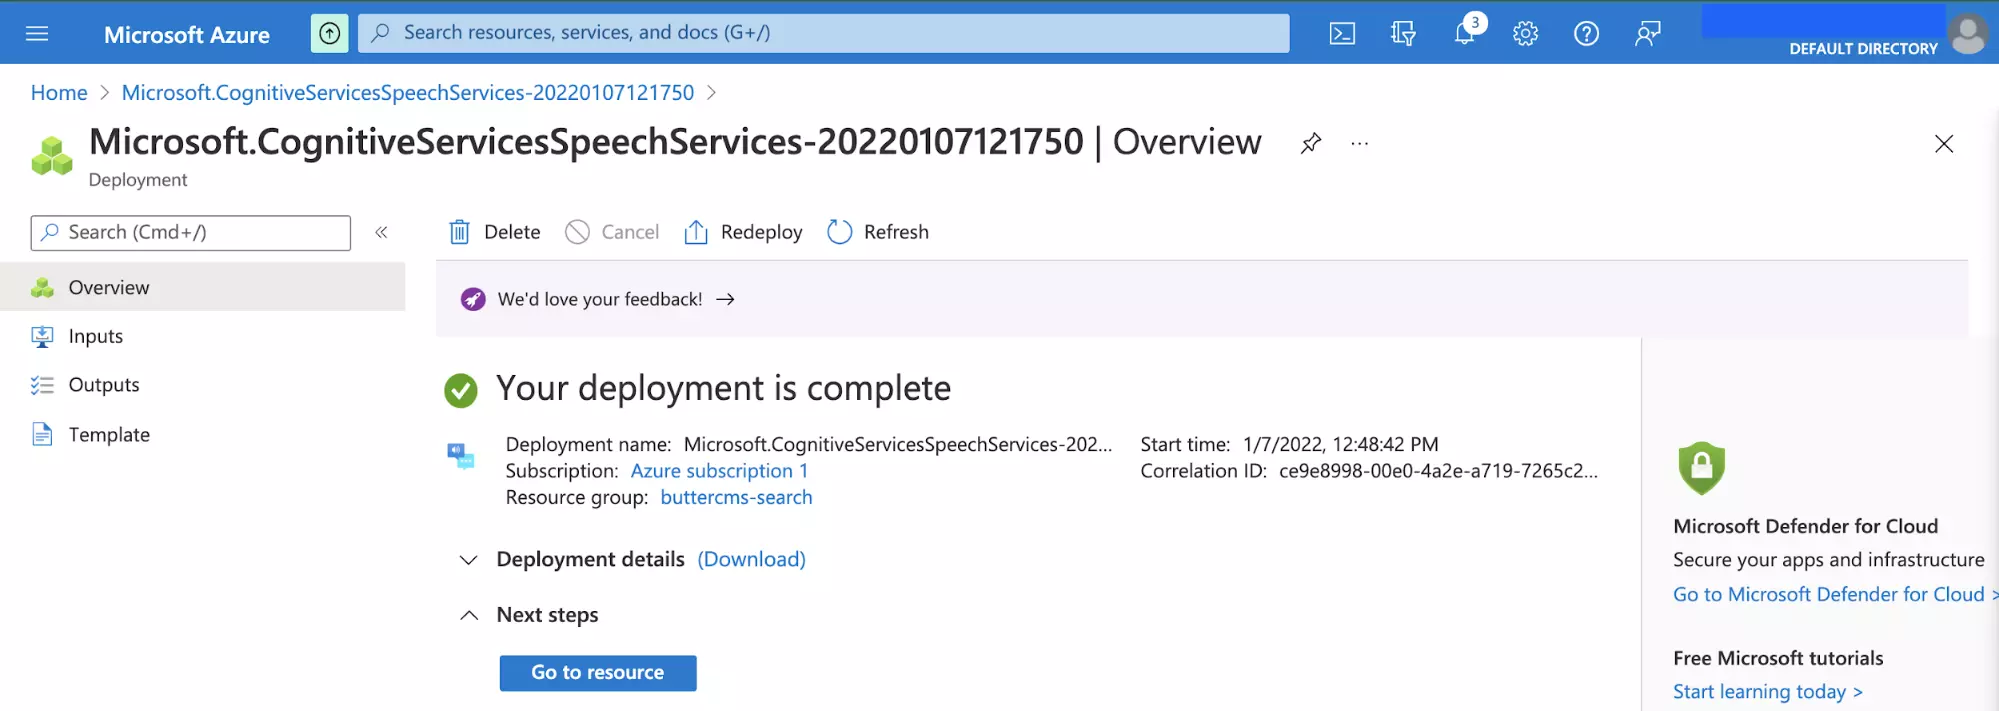 Screenshot of Microsoft Azure cognitive services overview 